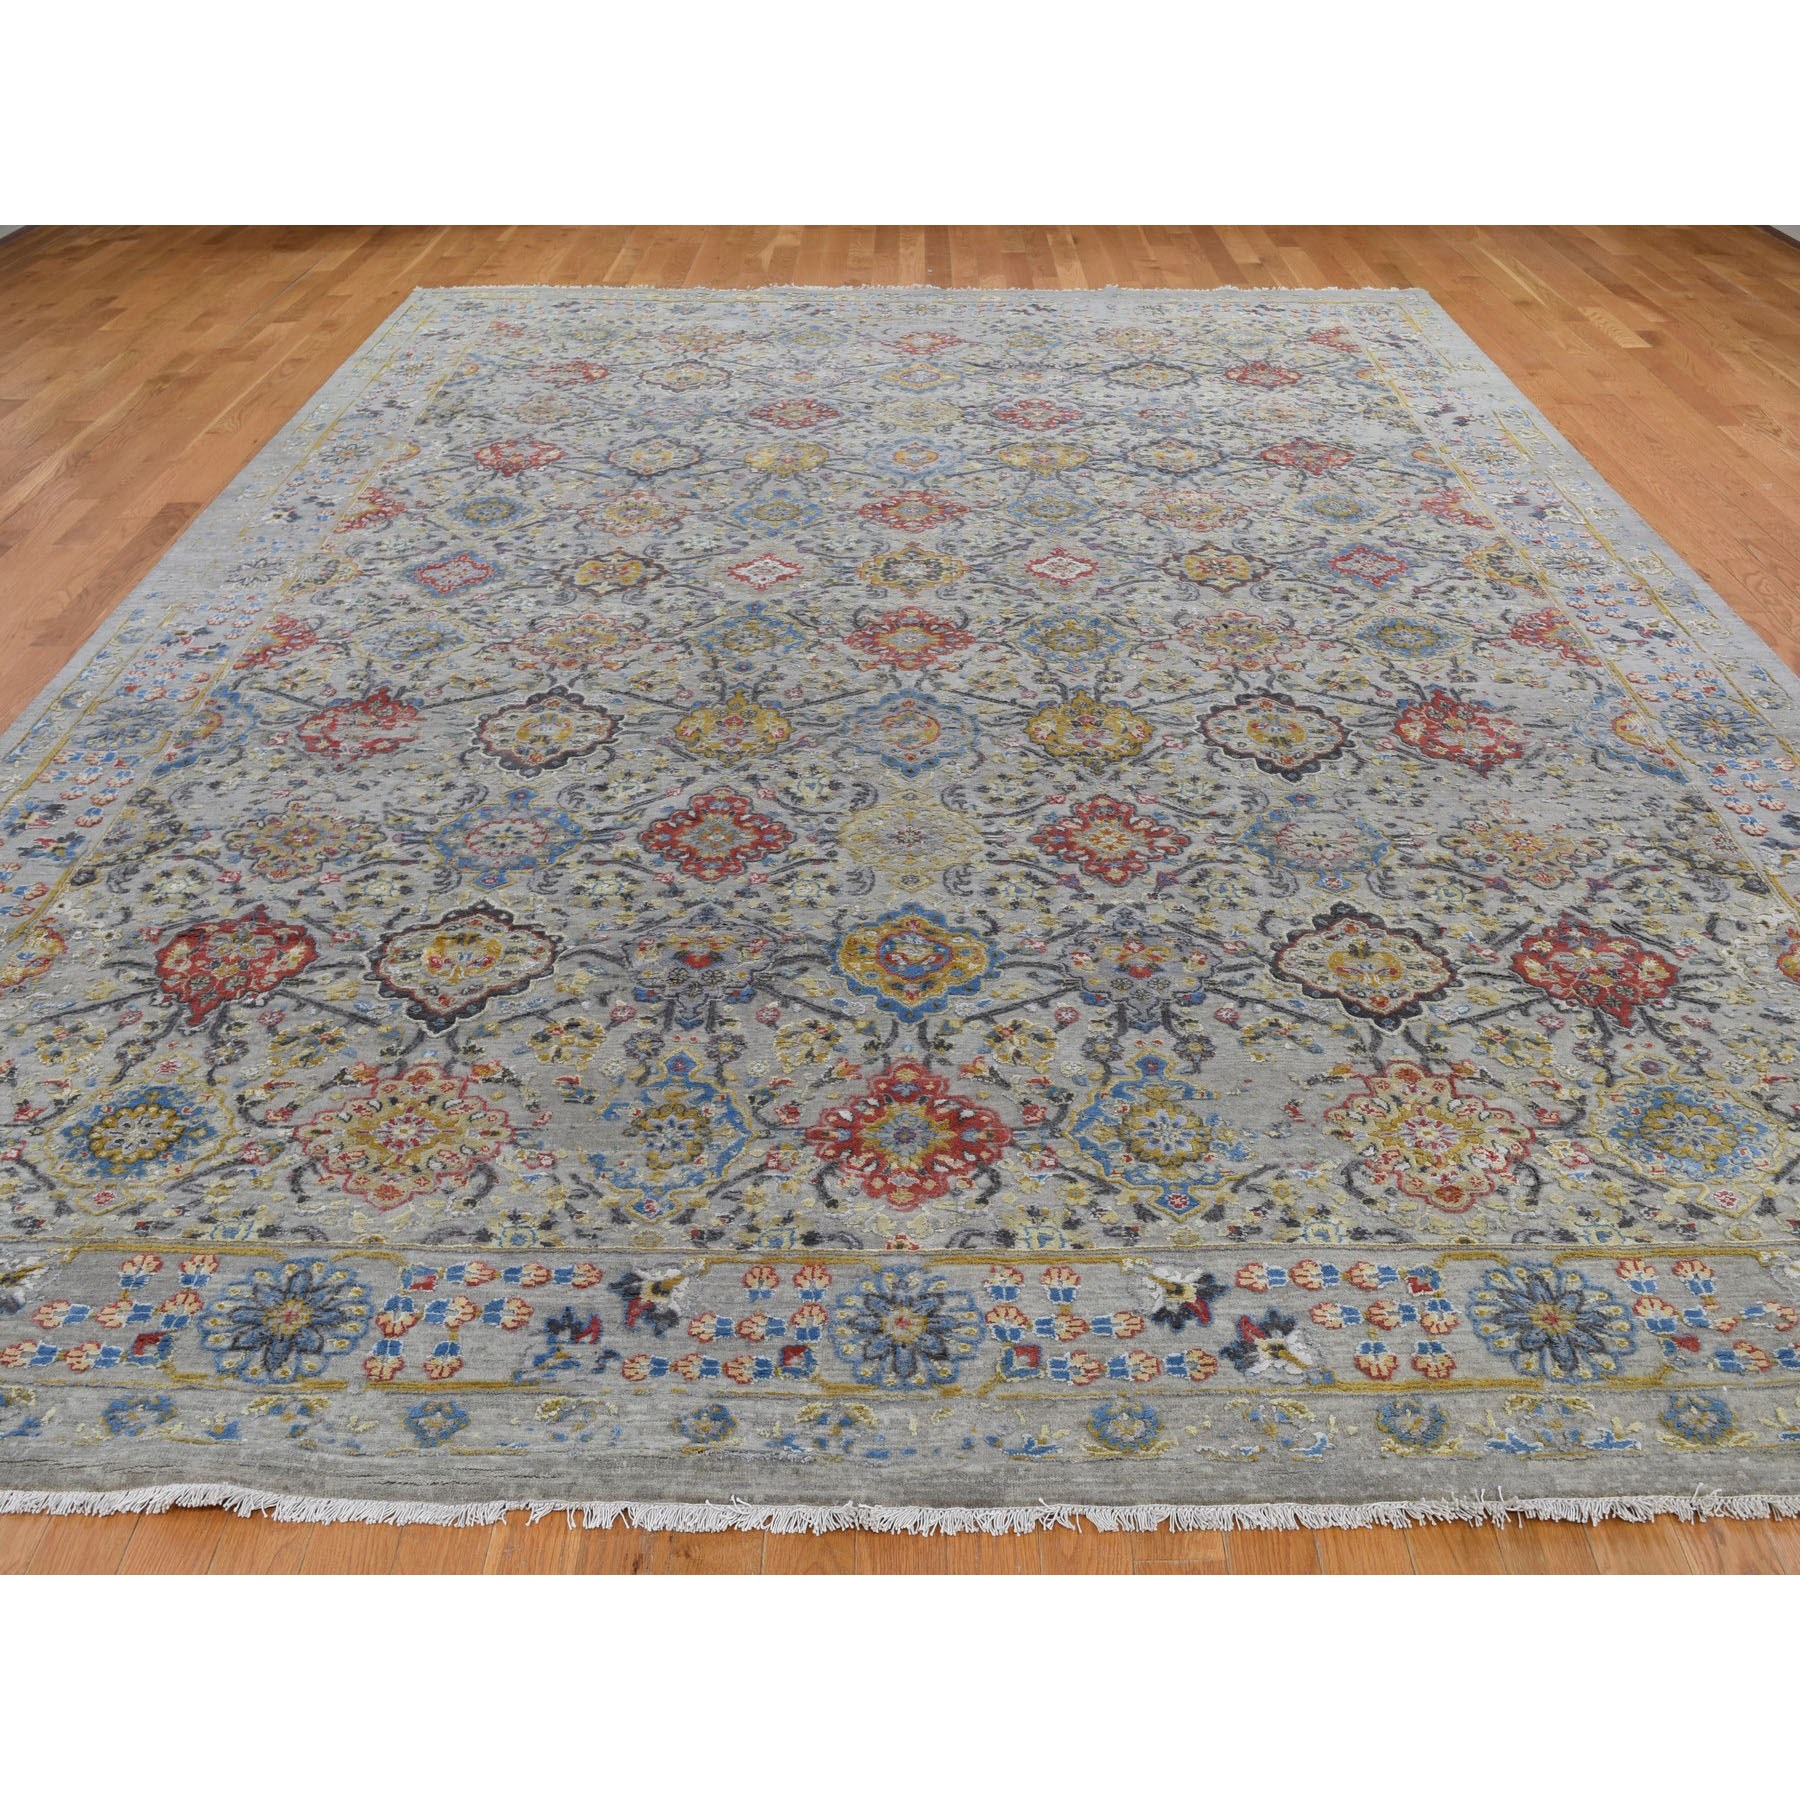 10-x14-1  THE SUNSET ROSETTES Pure Silk and Wool Hand Knotted Oriental Rug 